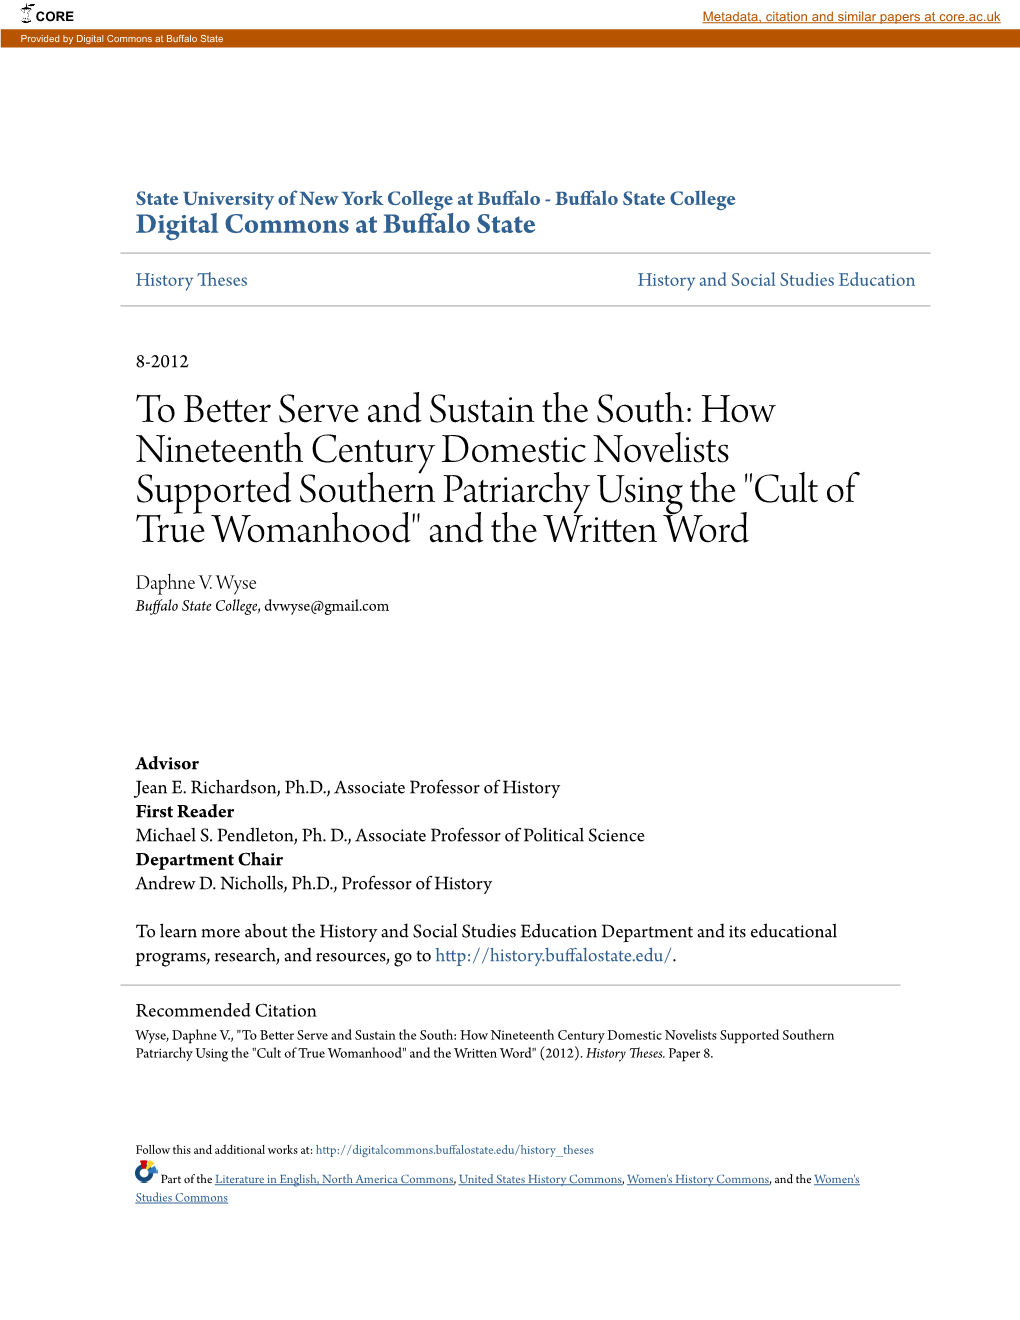 To Better Serve and Sustain the South: How Nineteenth Century